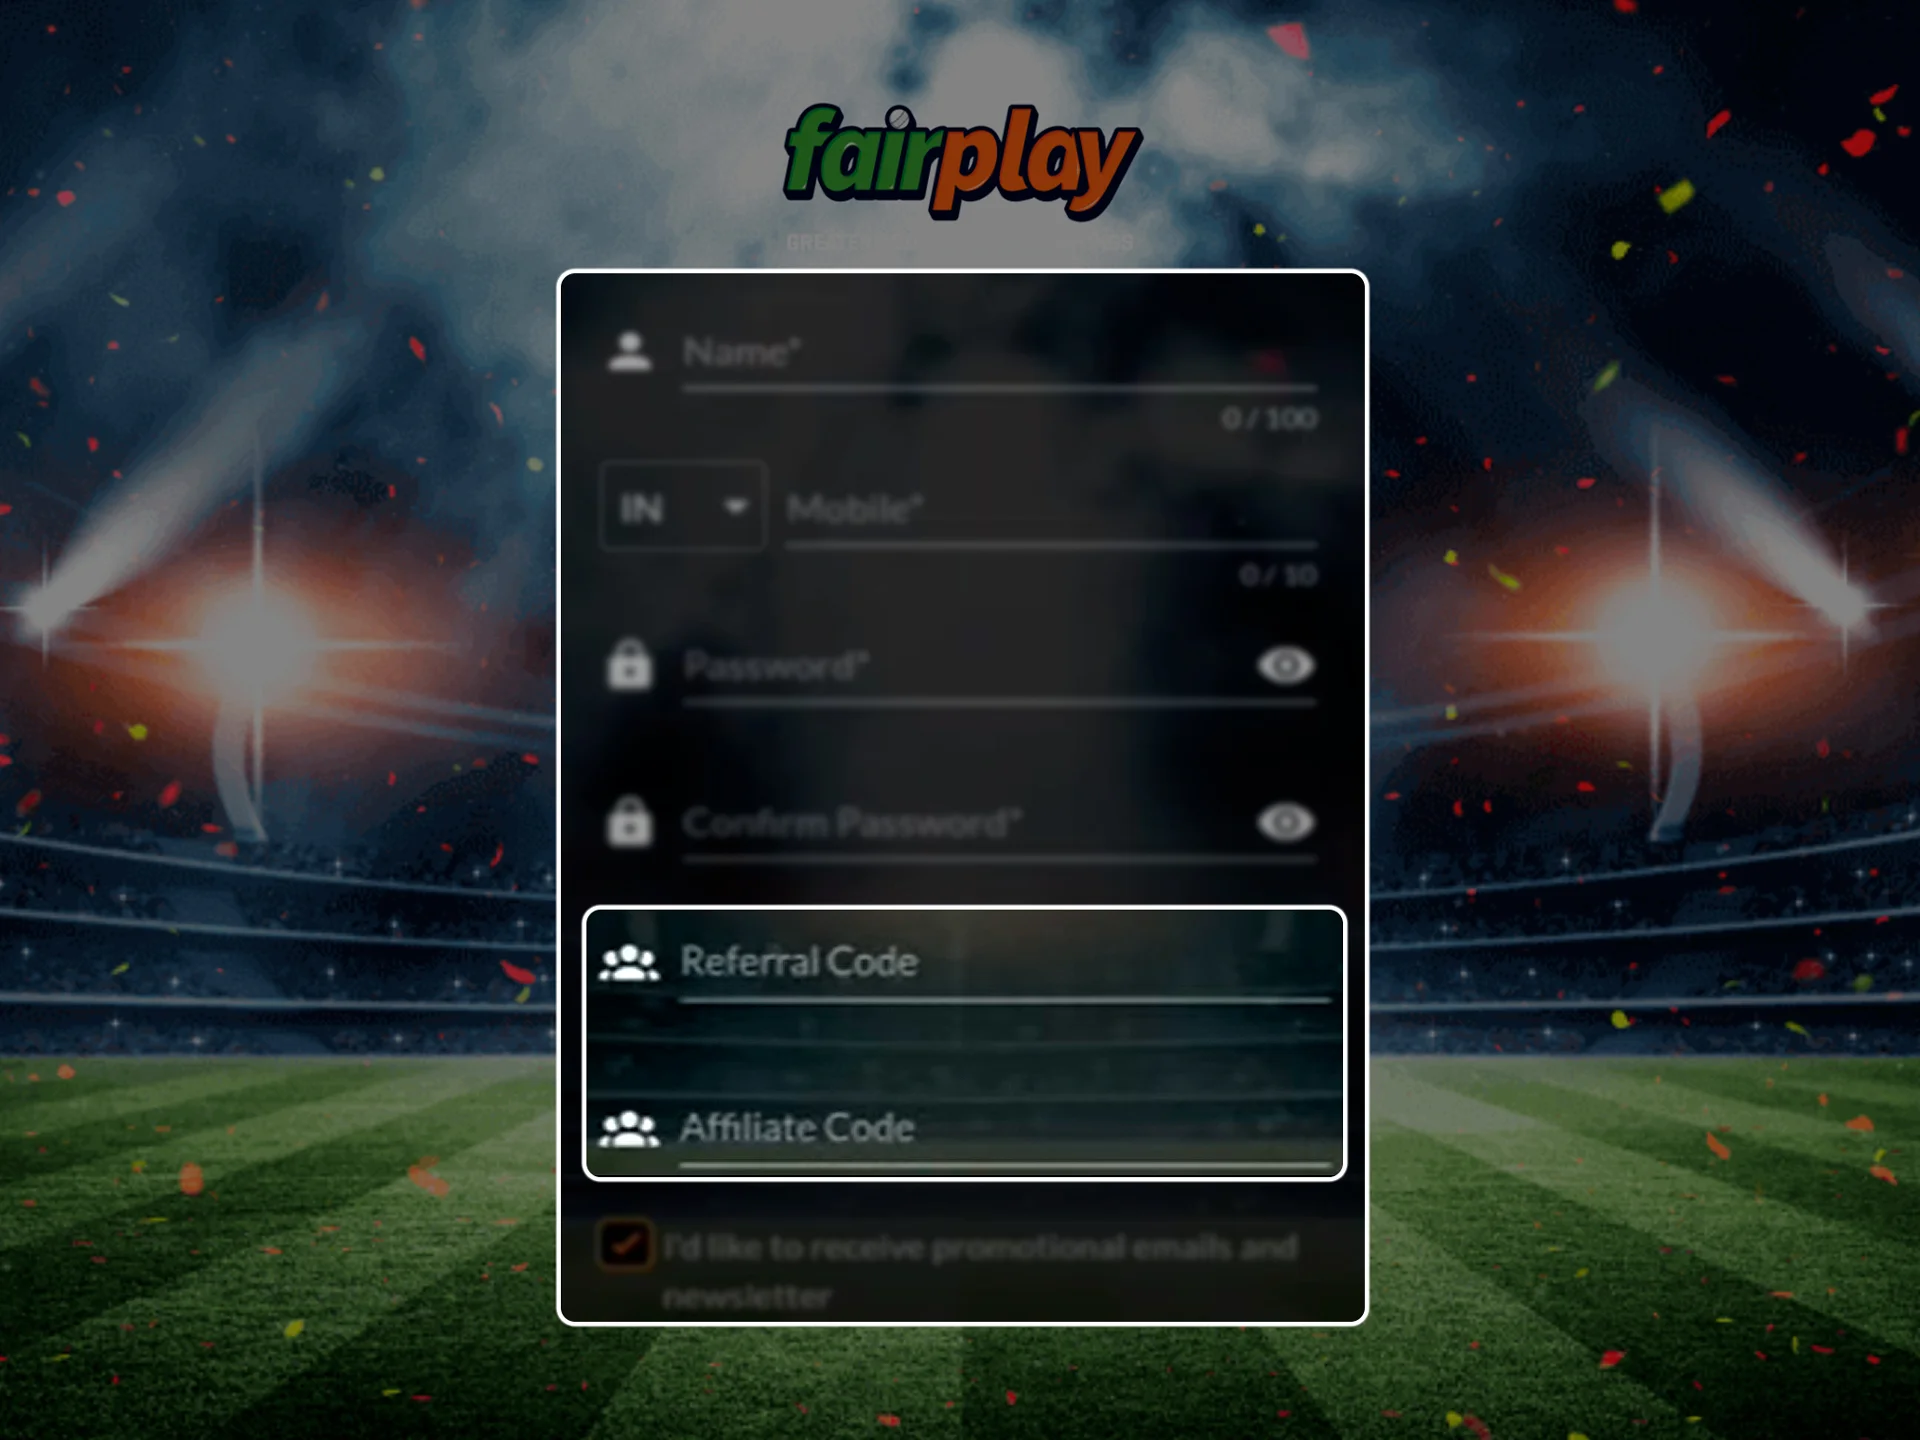 If you have promo codes, enter them in the appropriate fields in the Fairplay registration window.